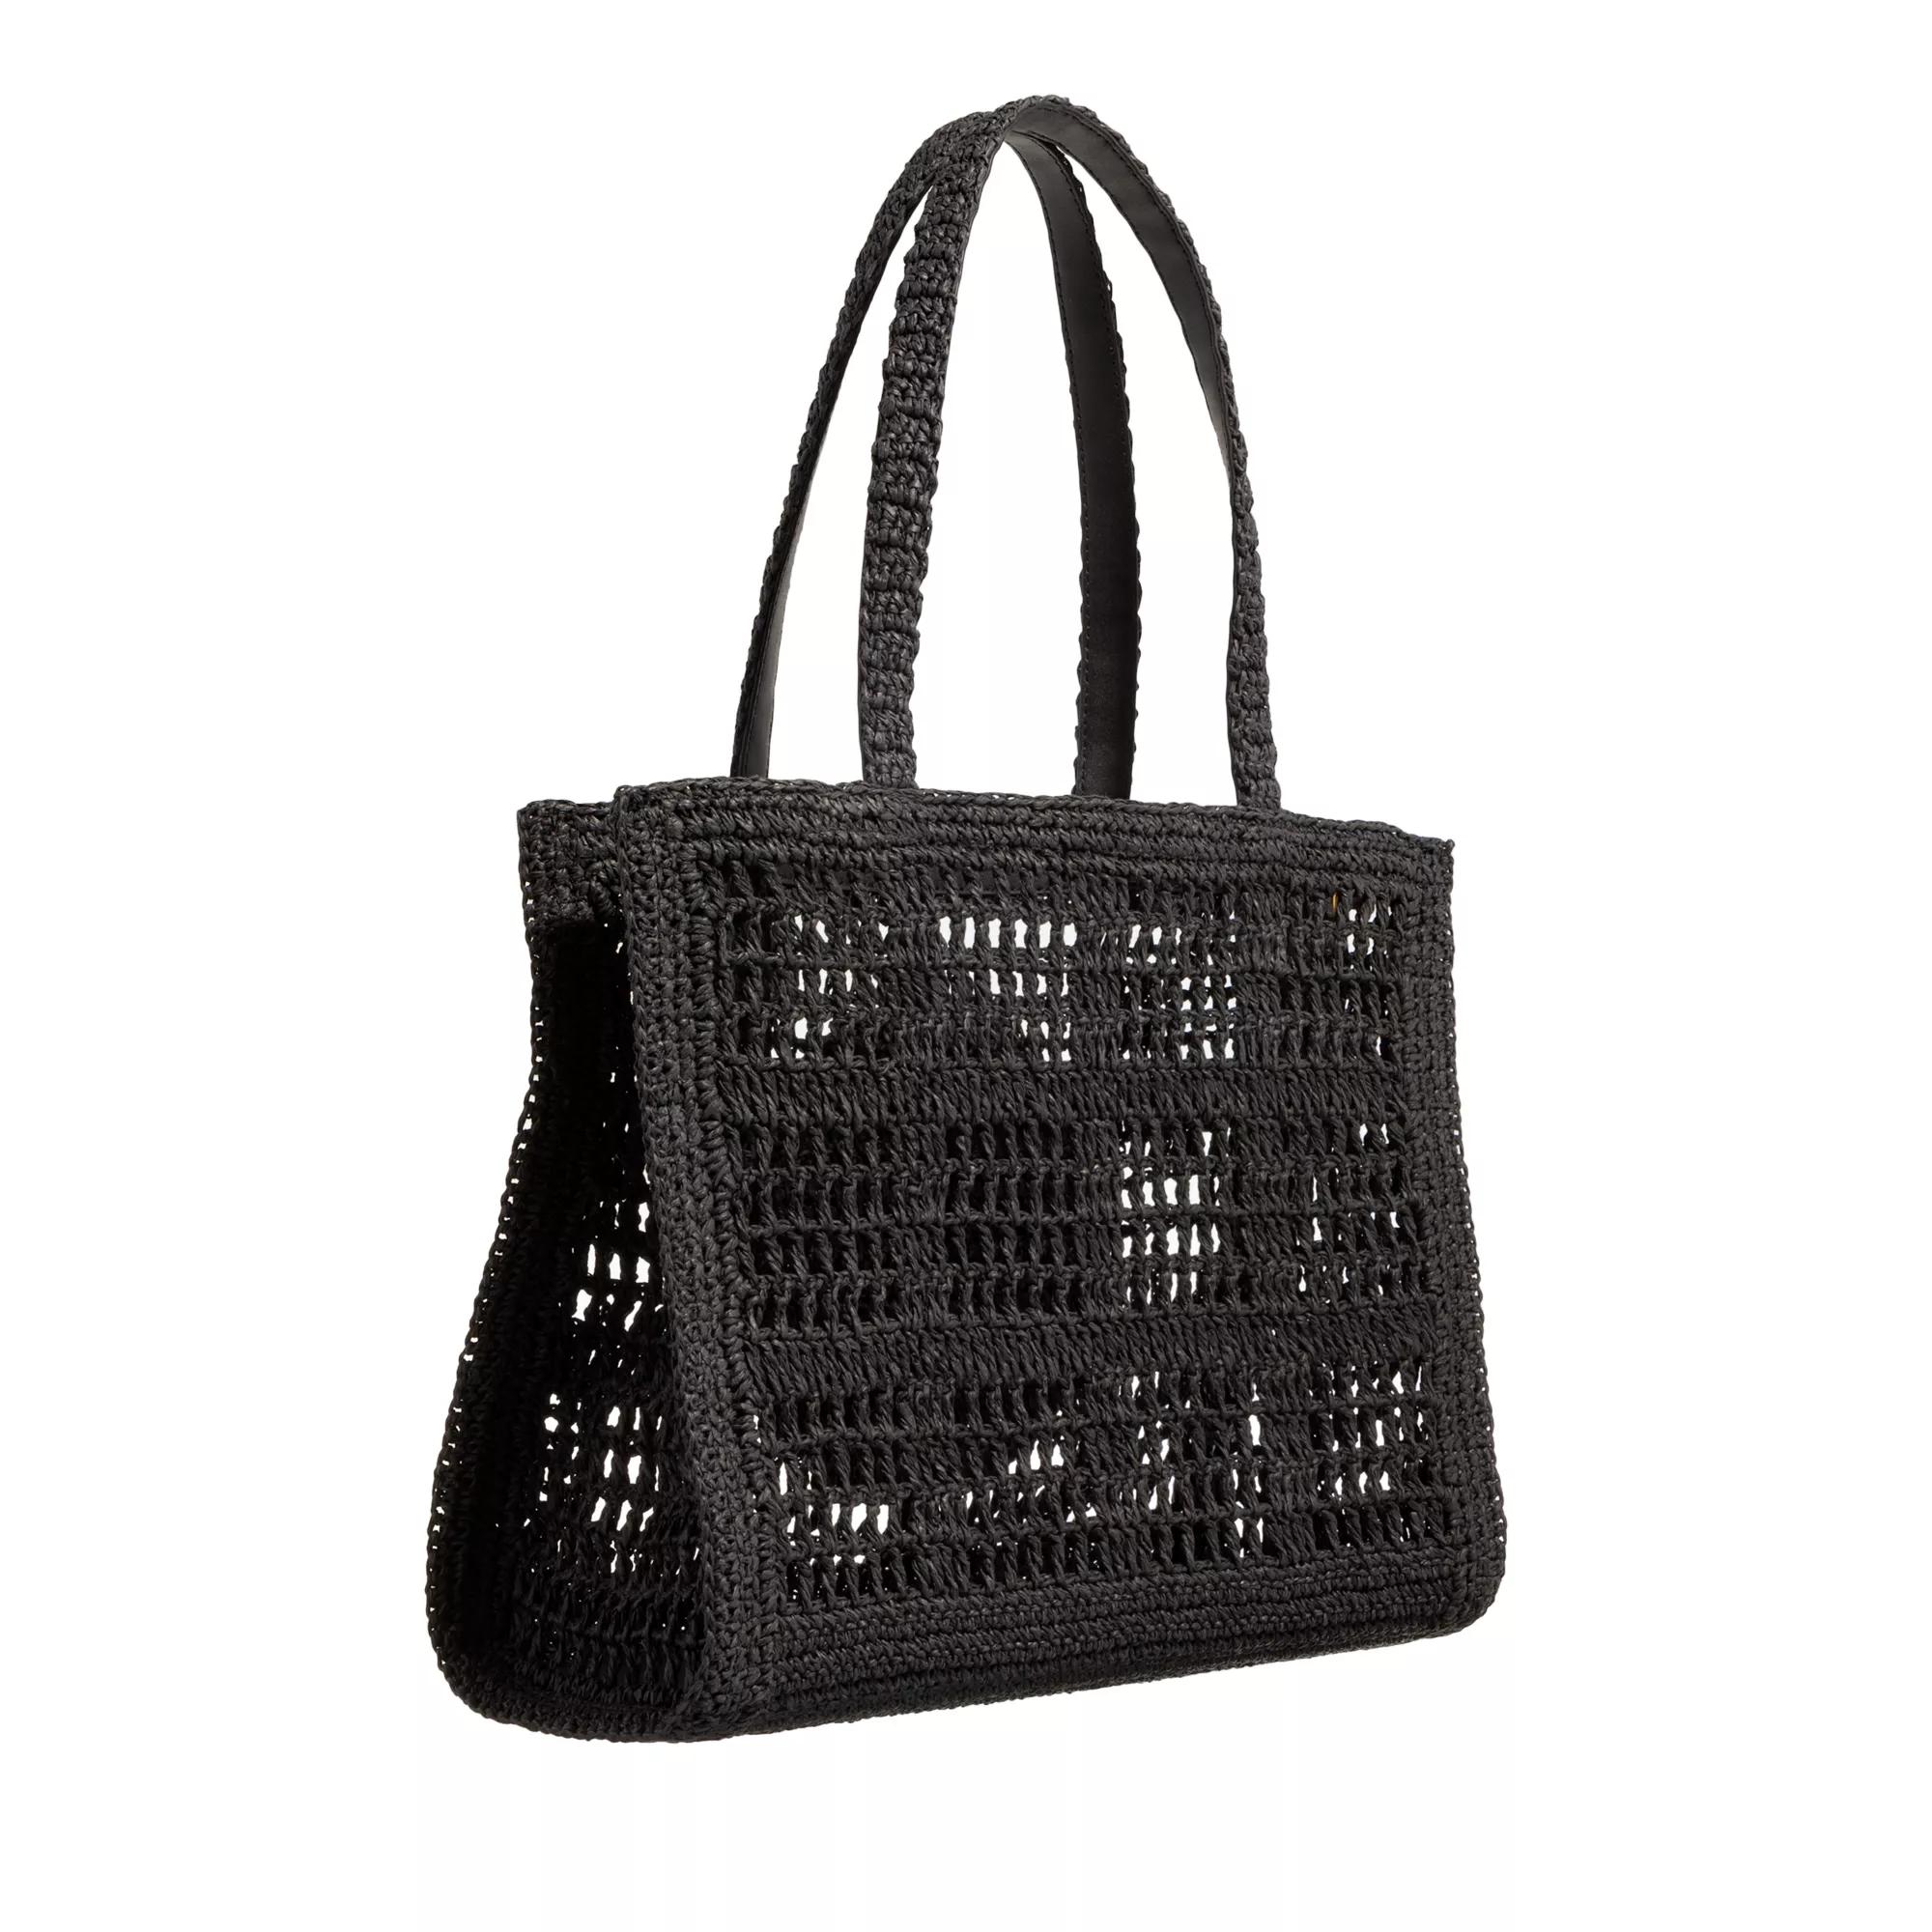 TORY BURCH Totes Ella Hand-Crocheted Small Tote in zwart